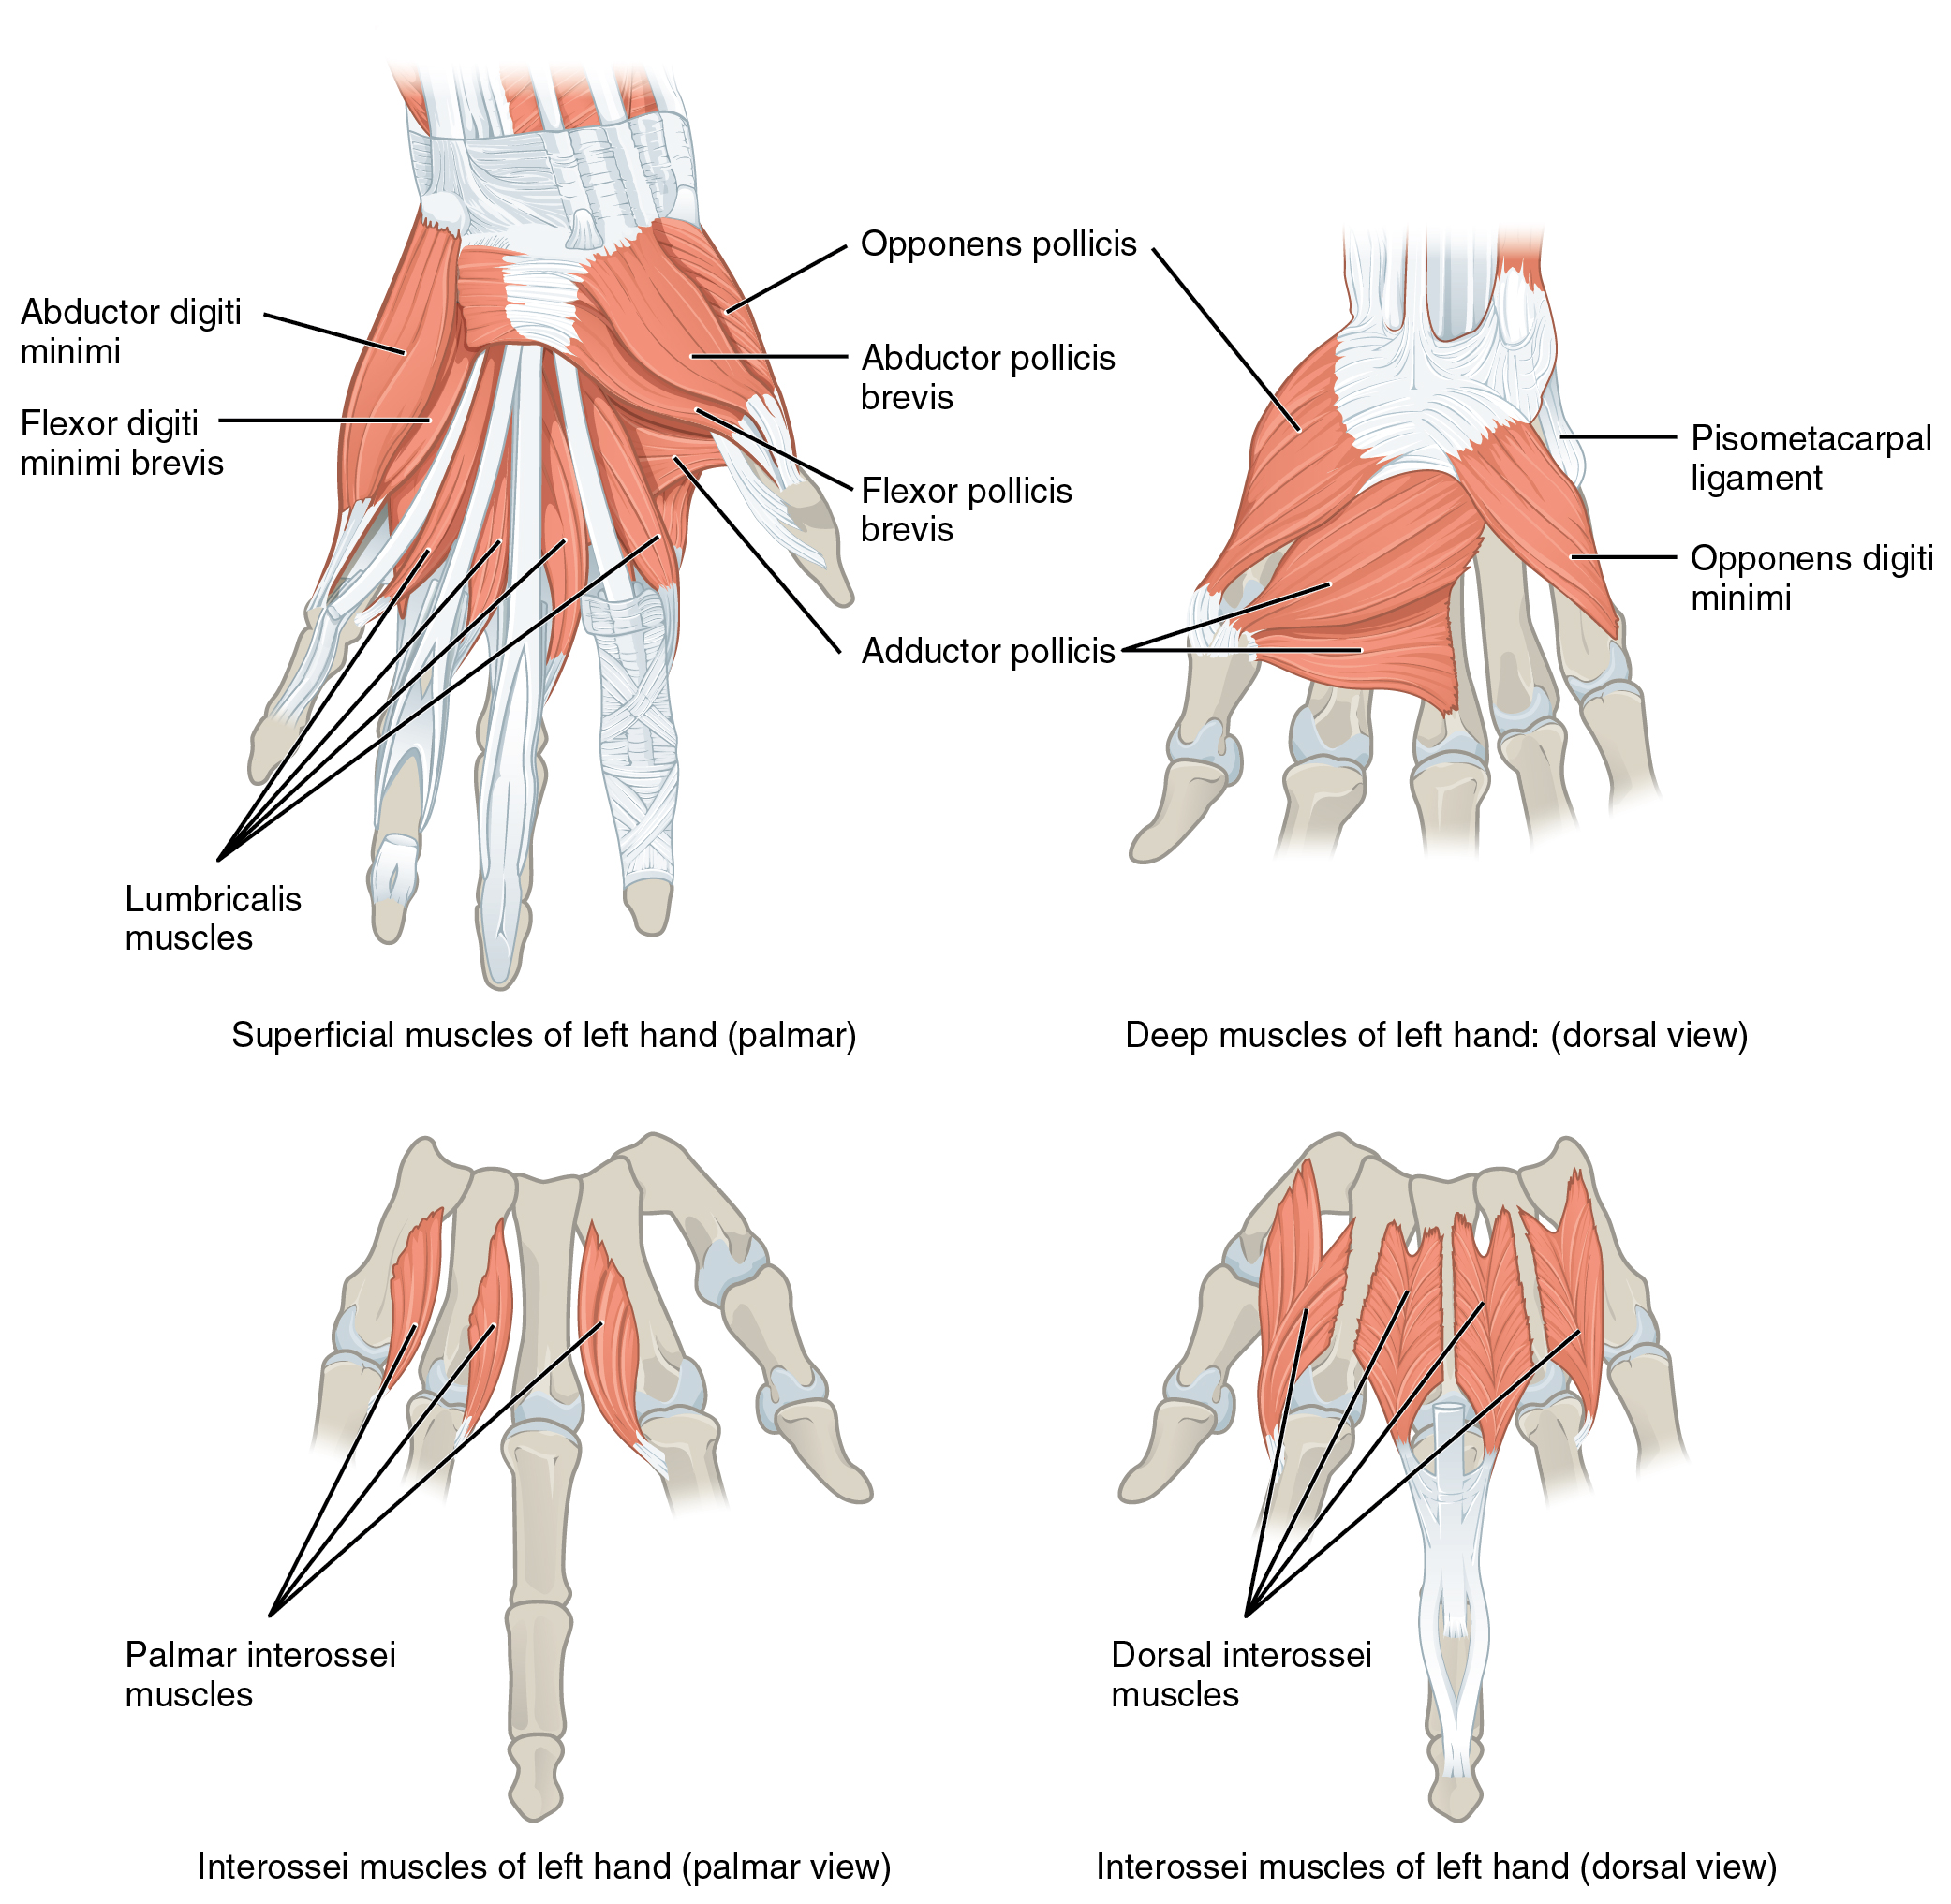 This multipart figure shows the intrinsic muscles of the hand with the major muscle groups labeled.